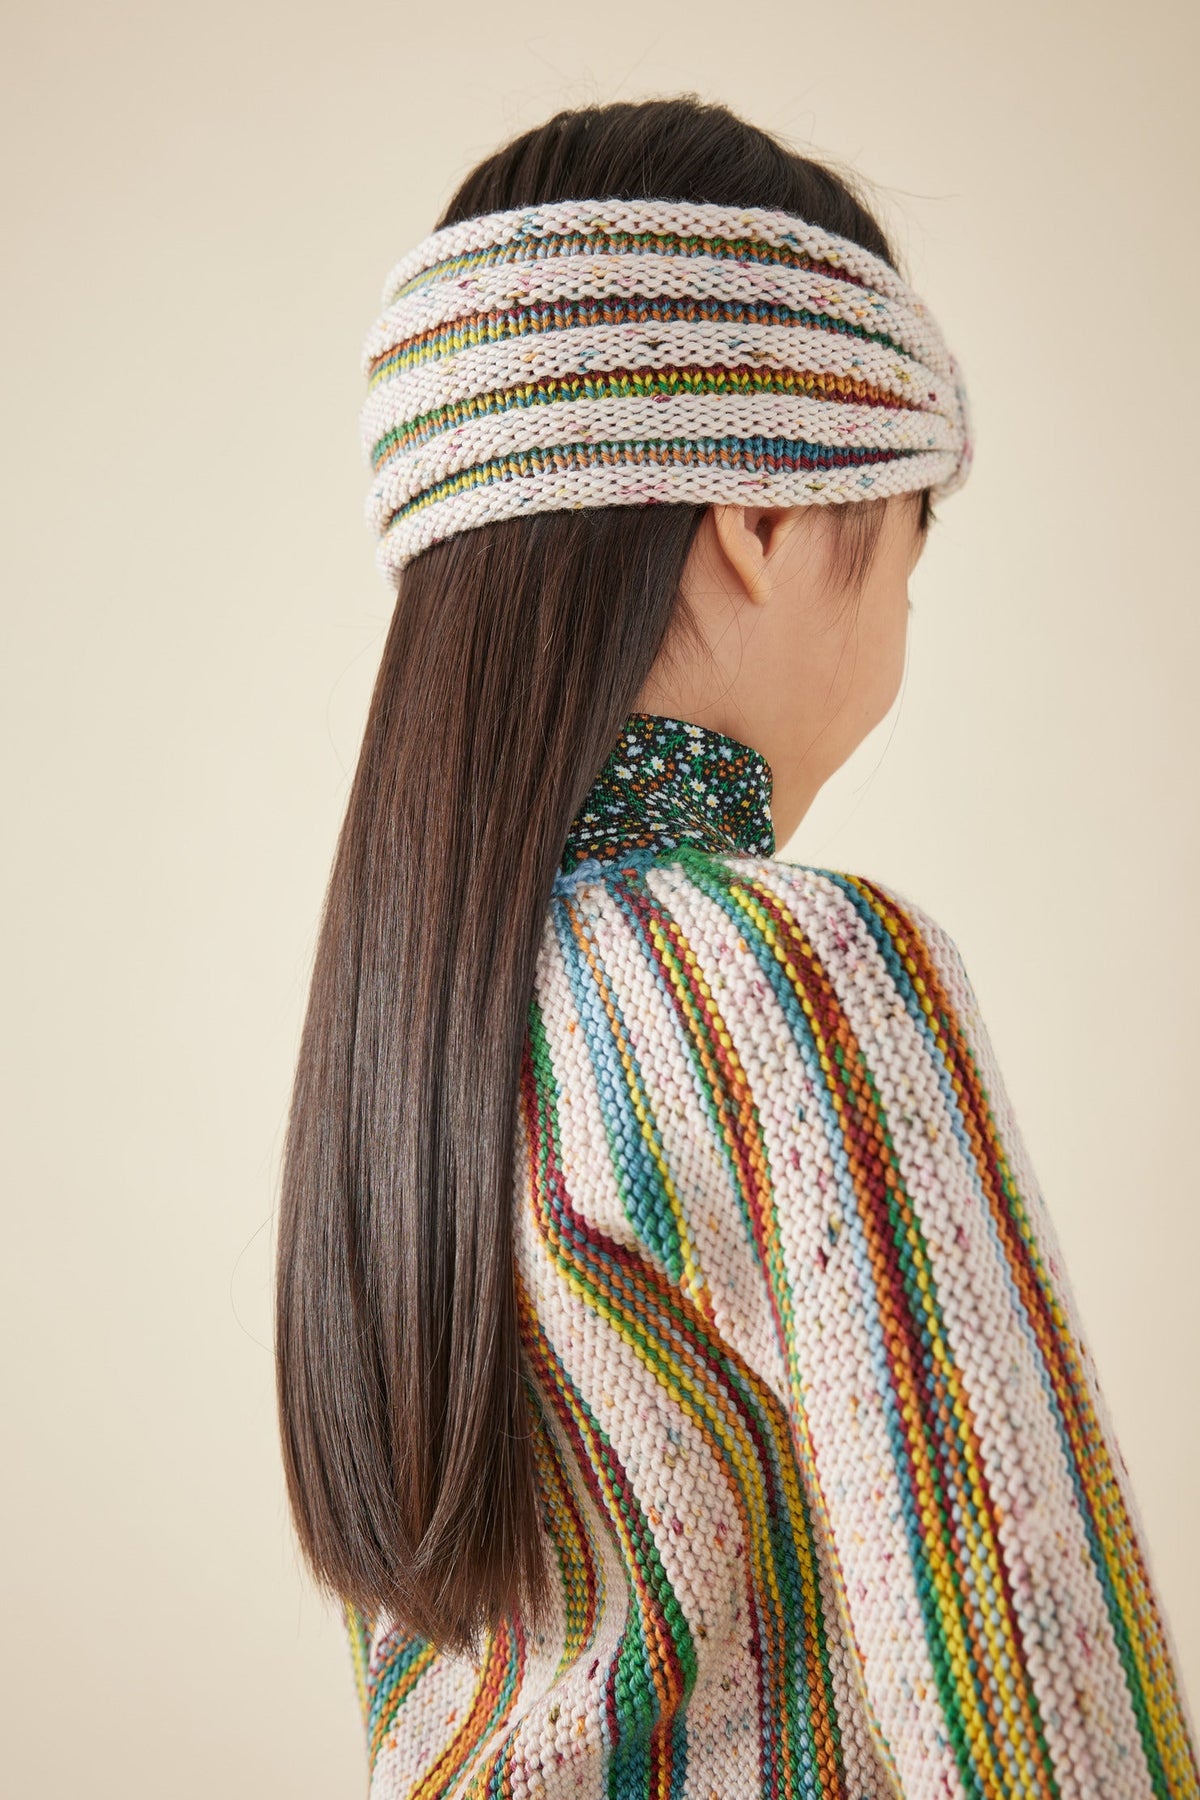 Accordion Pleat Headband - Carnival Space Dye+Model is 43 inches tall, 38lbs, wearing a size Small/Medium